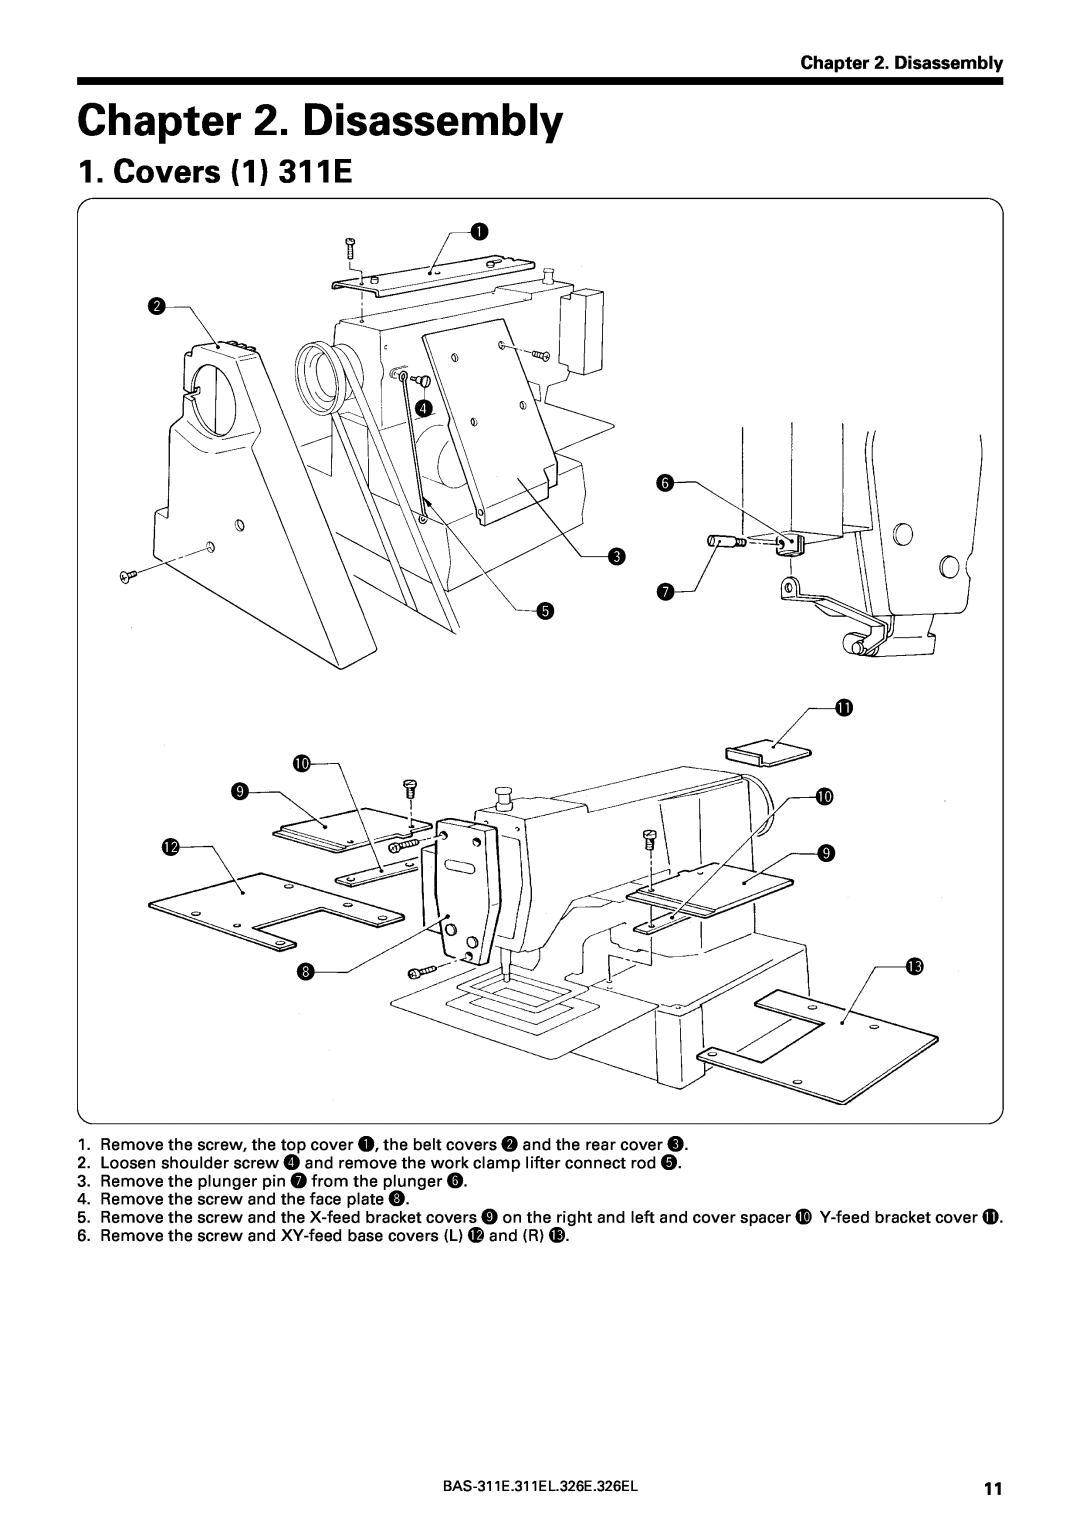 Brother BAS-311E service manual Disassembly, Covers 1 311E, q w r y e u t 